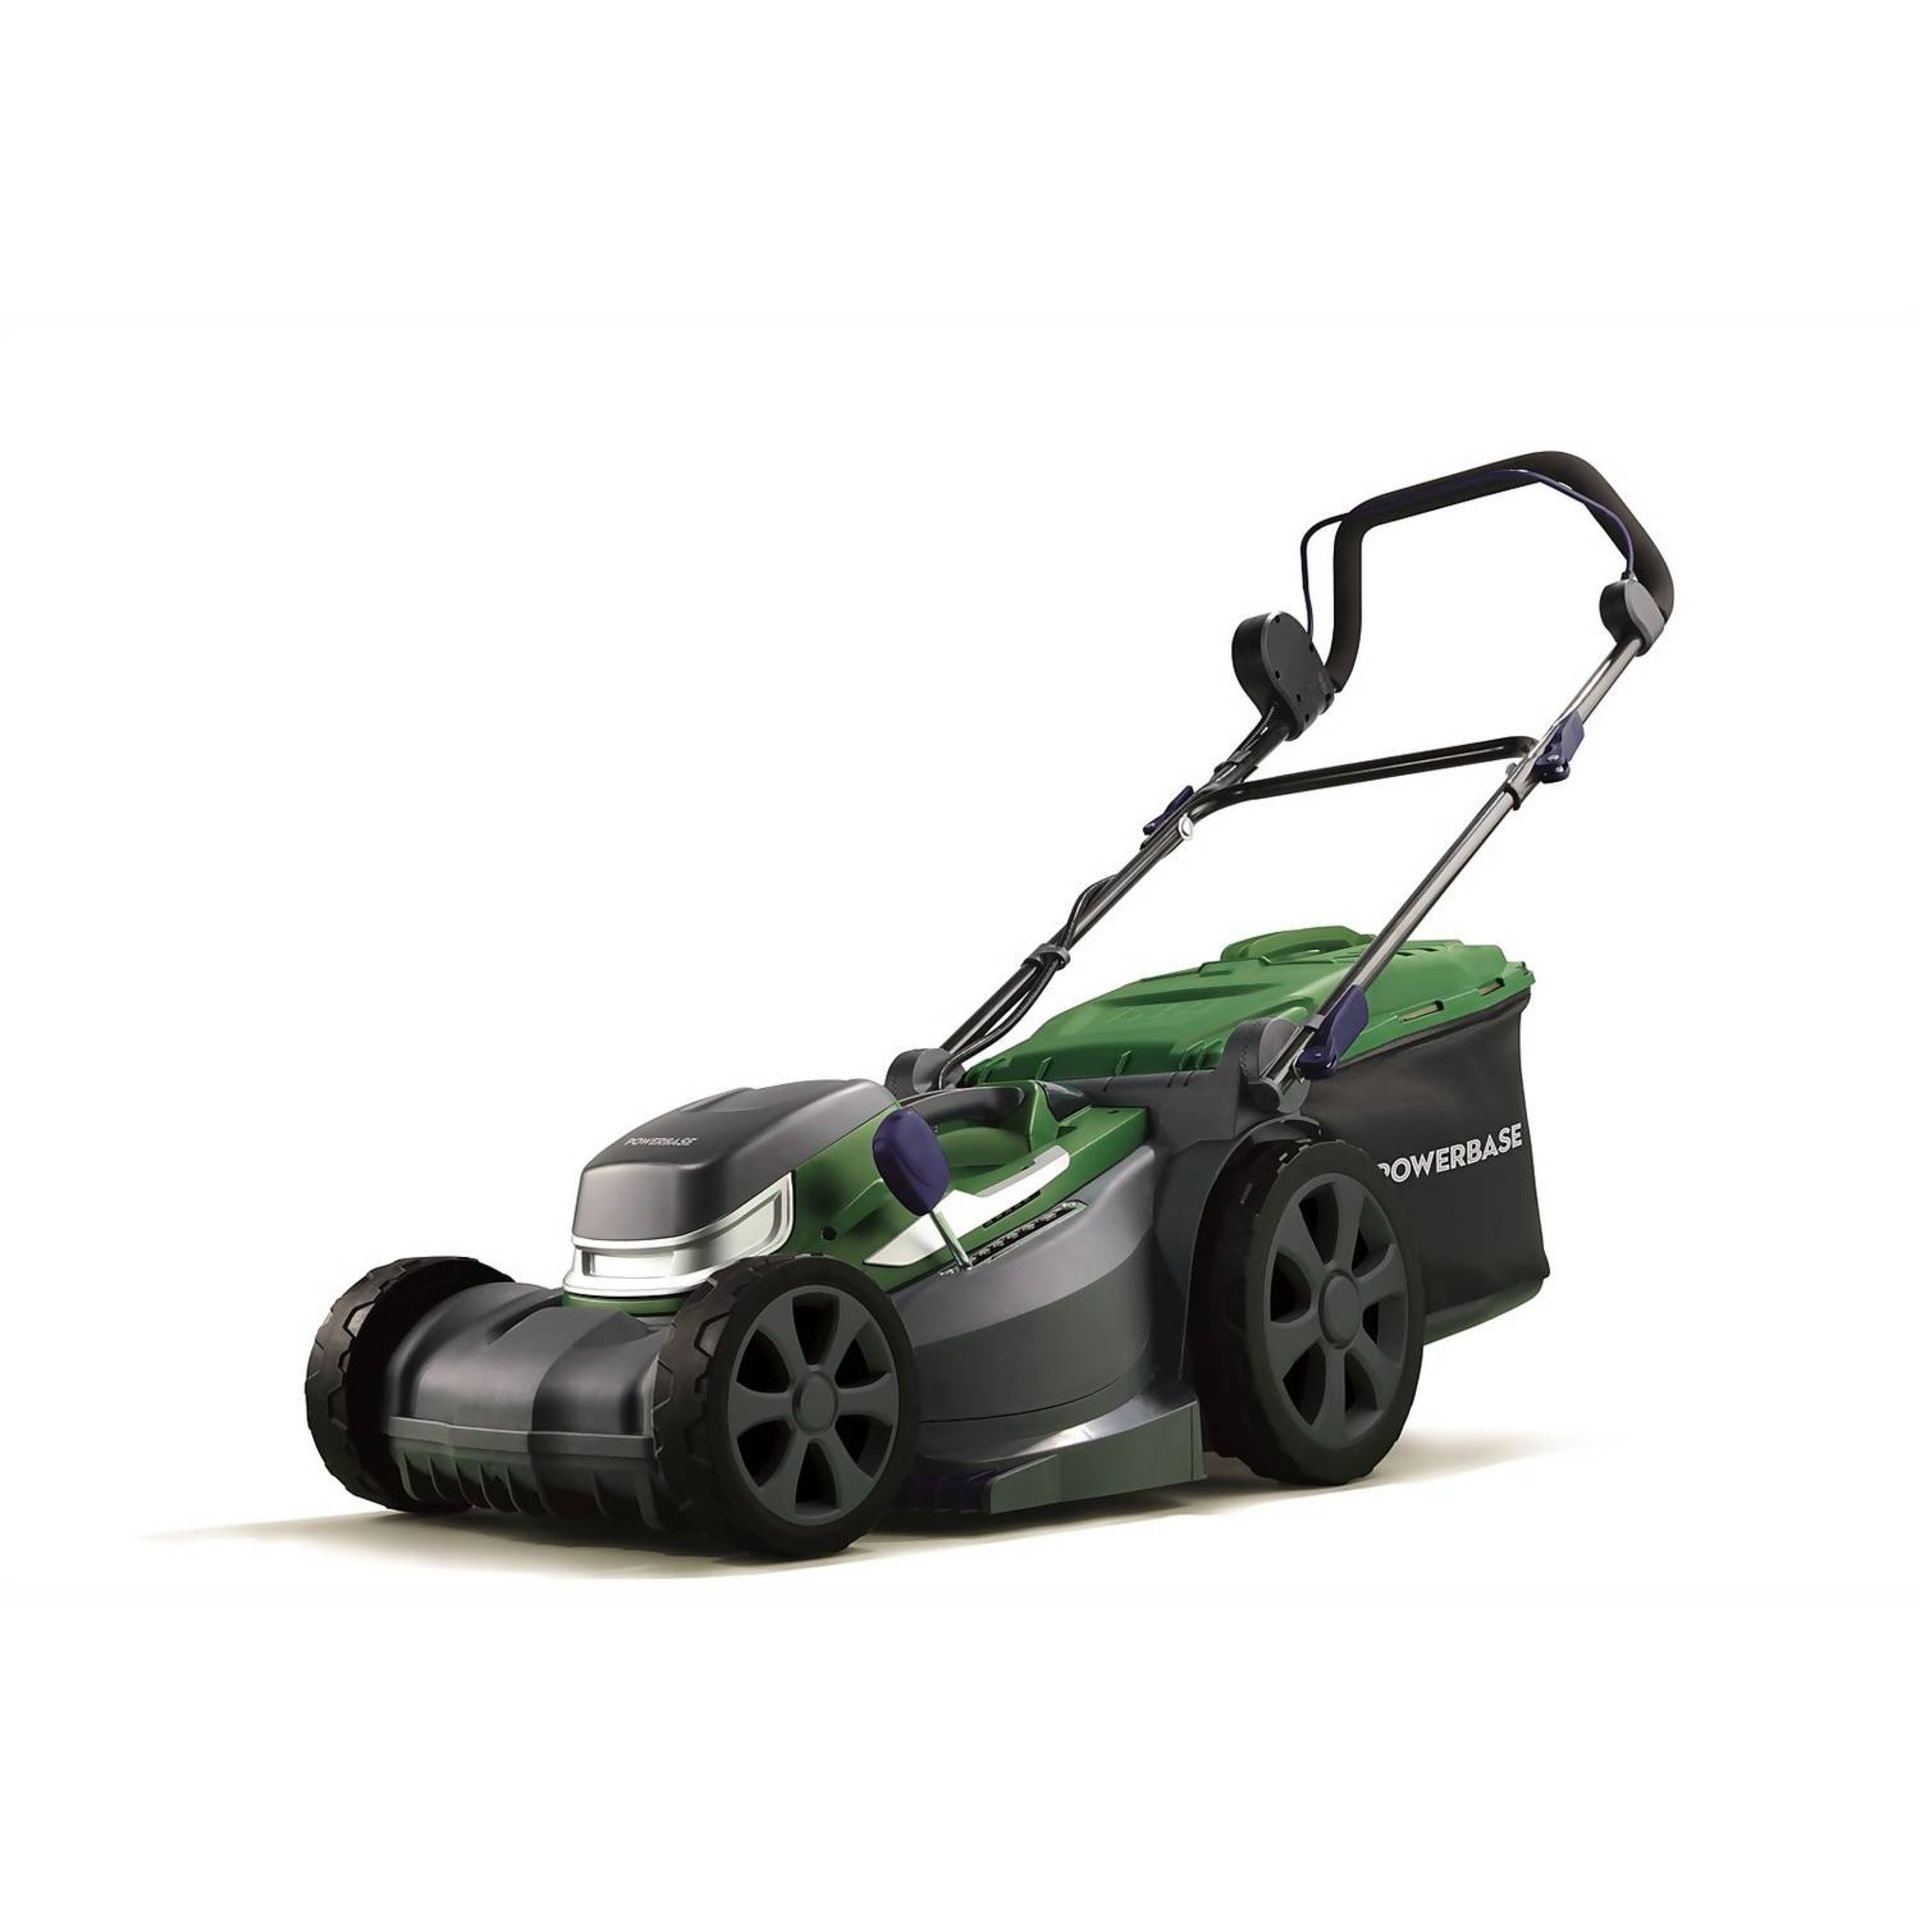 (P10) 1x Powerbase 40cm 40V Cordless Lawn Mower RRP £199. New, Sealed Item With Some Box Damage.